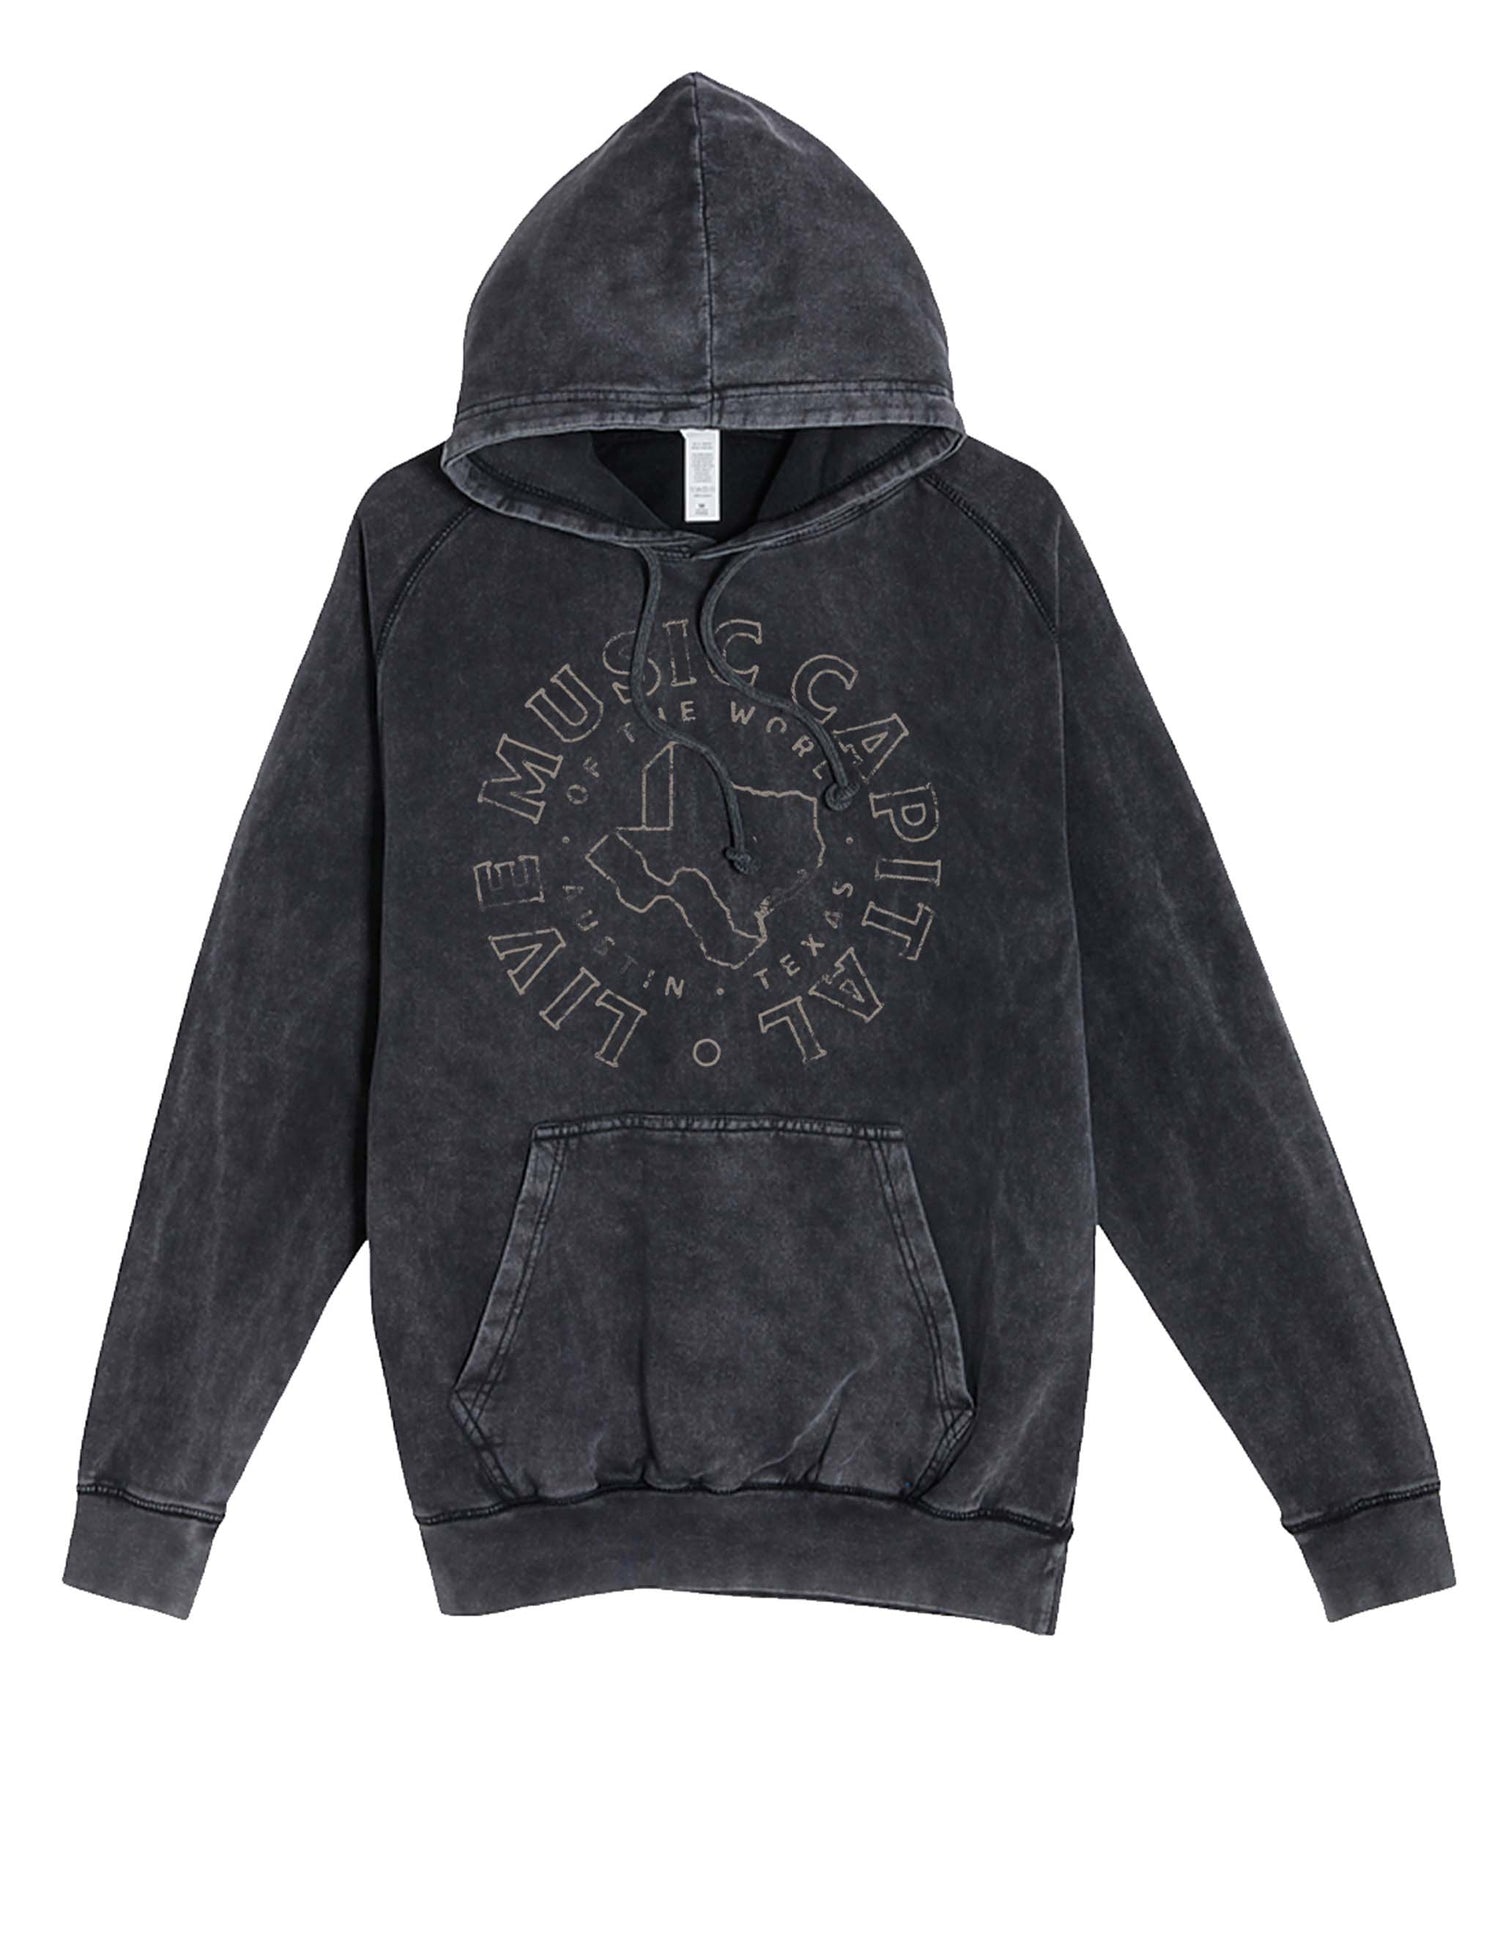 Texas State Crest Hoodie